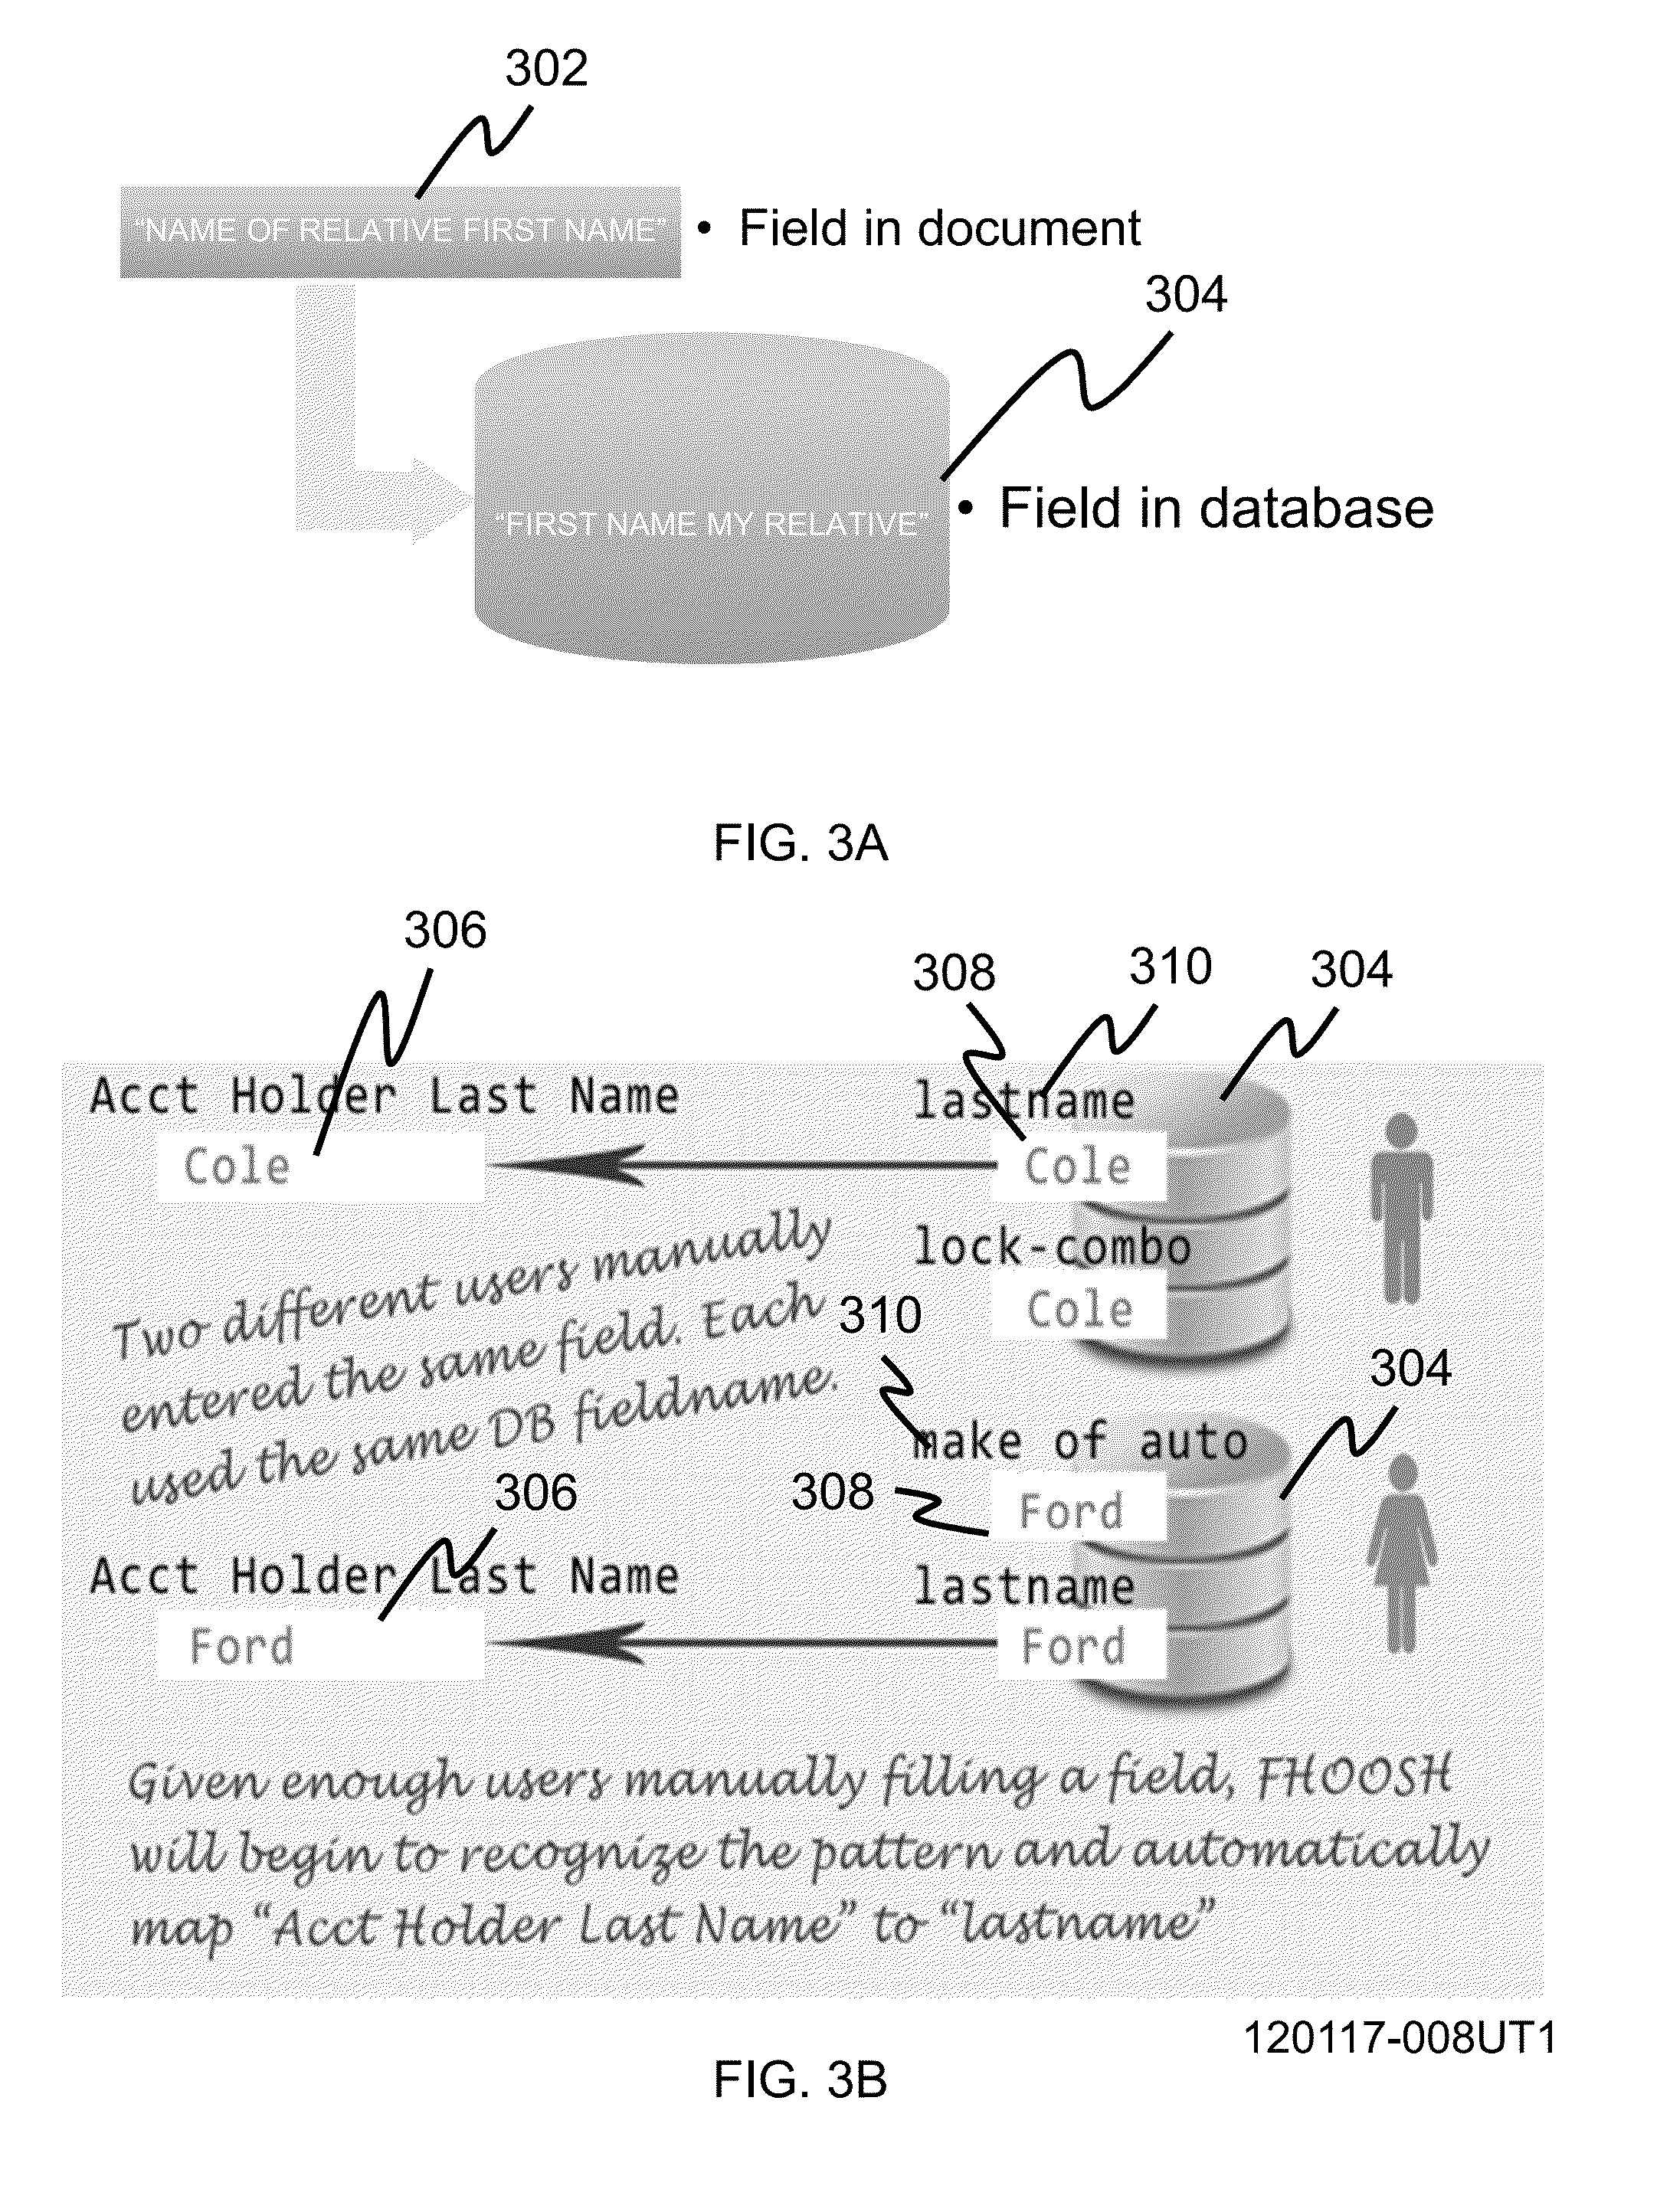 Systems and methods for locating, identifying and mapping electronic form fields